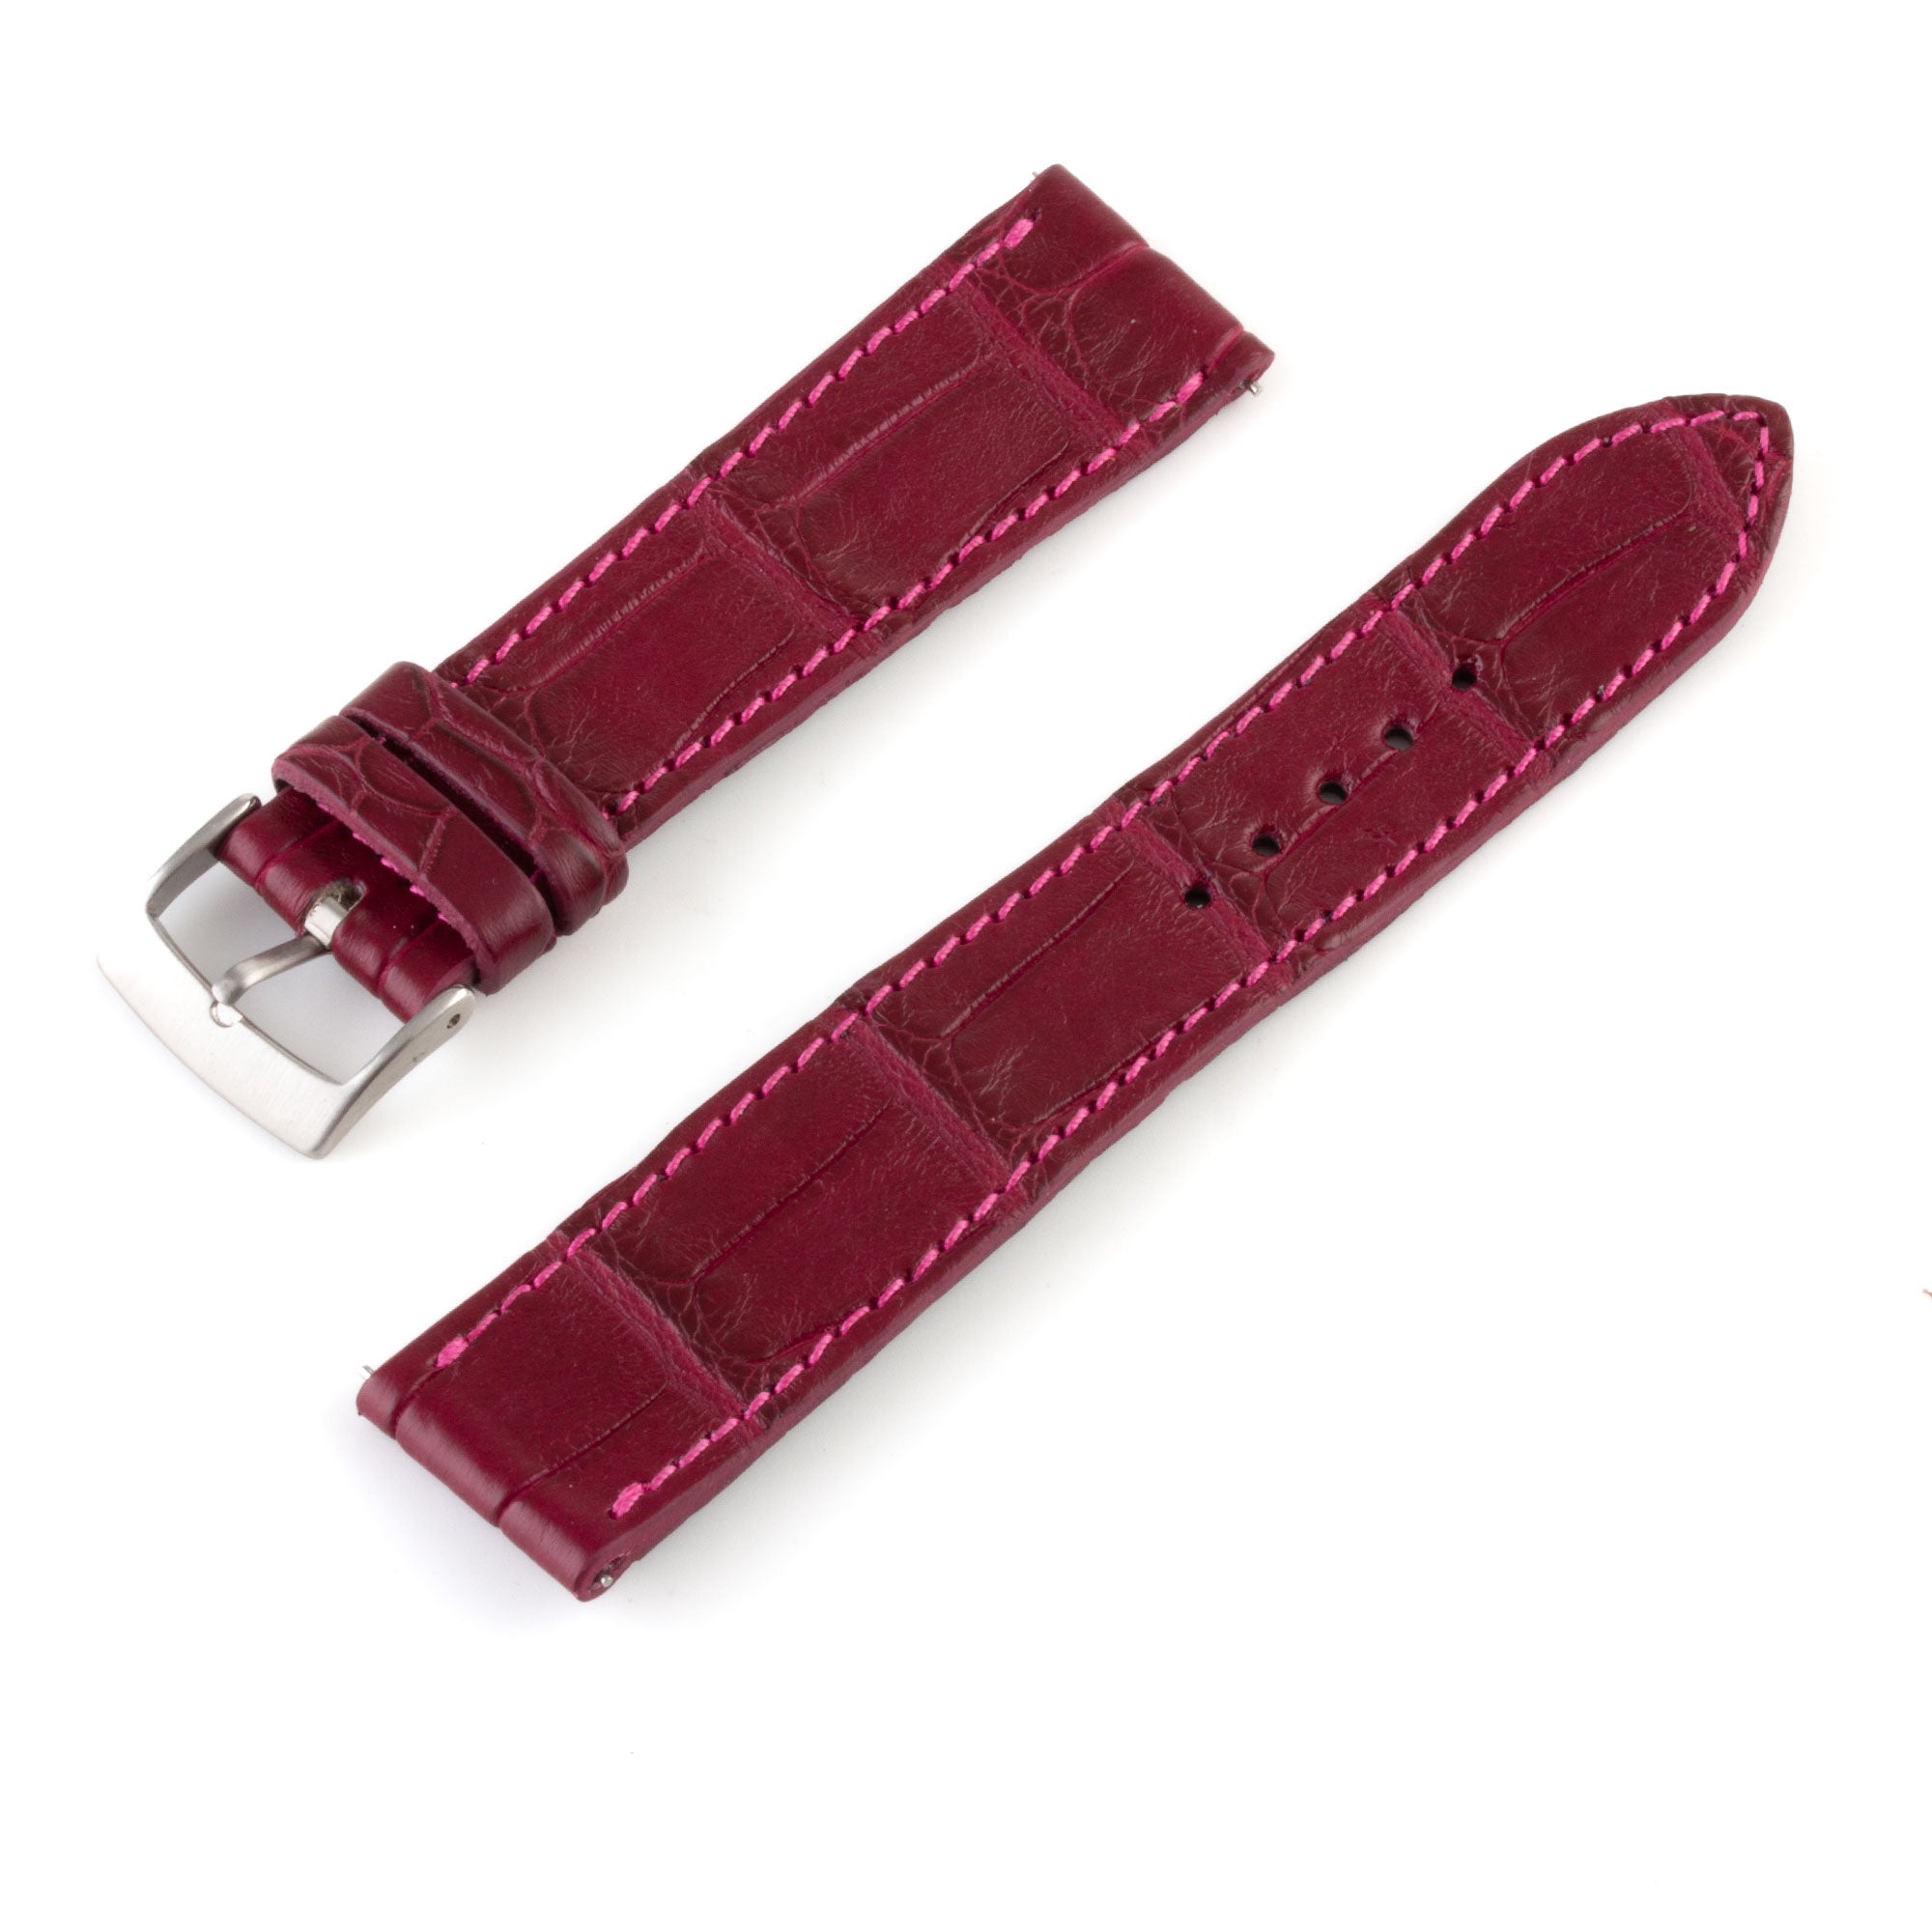 Alligator "Solo" leather watch band - 20mm width (0.79 inches) / Size M (n° 8)